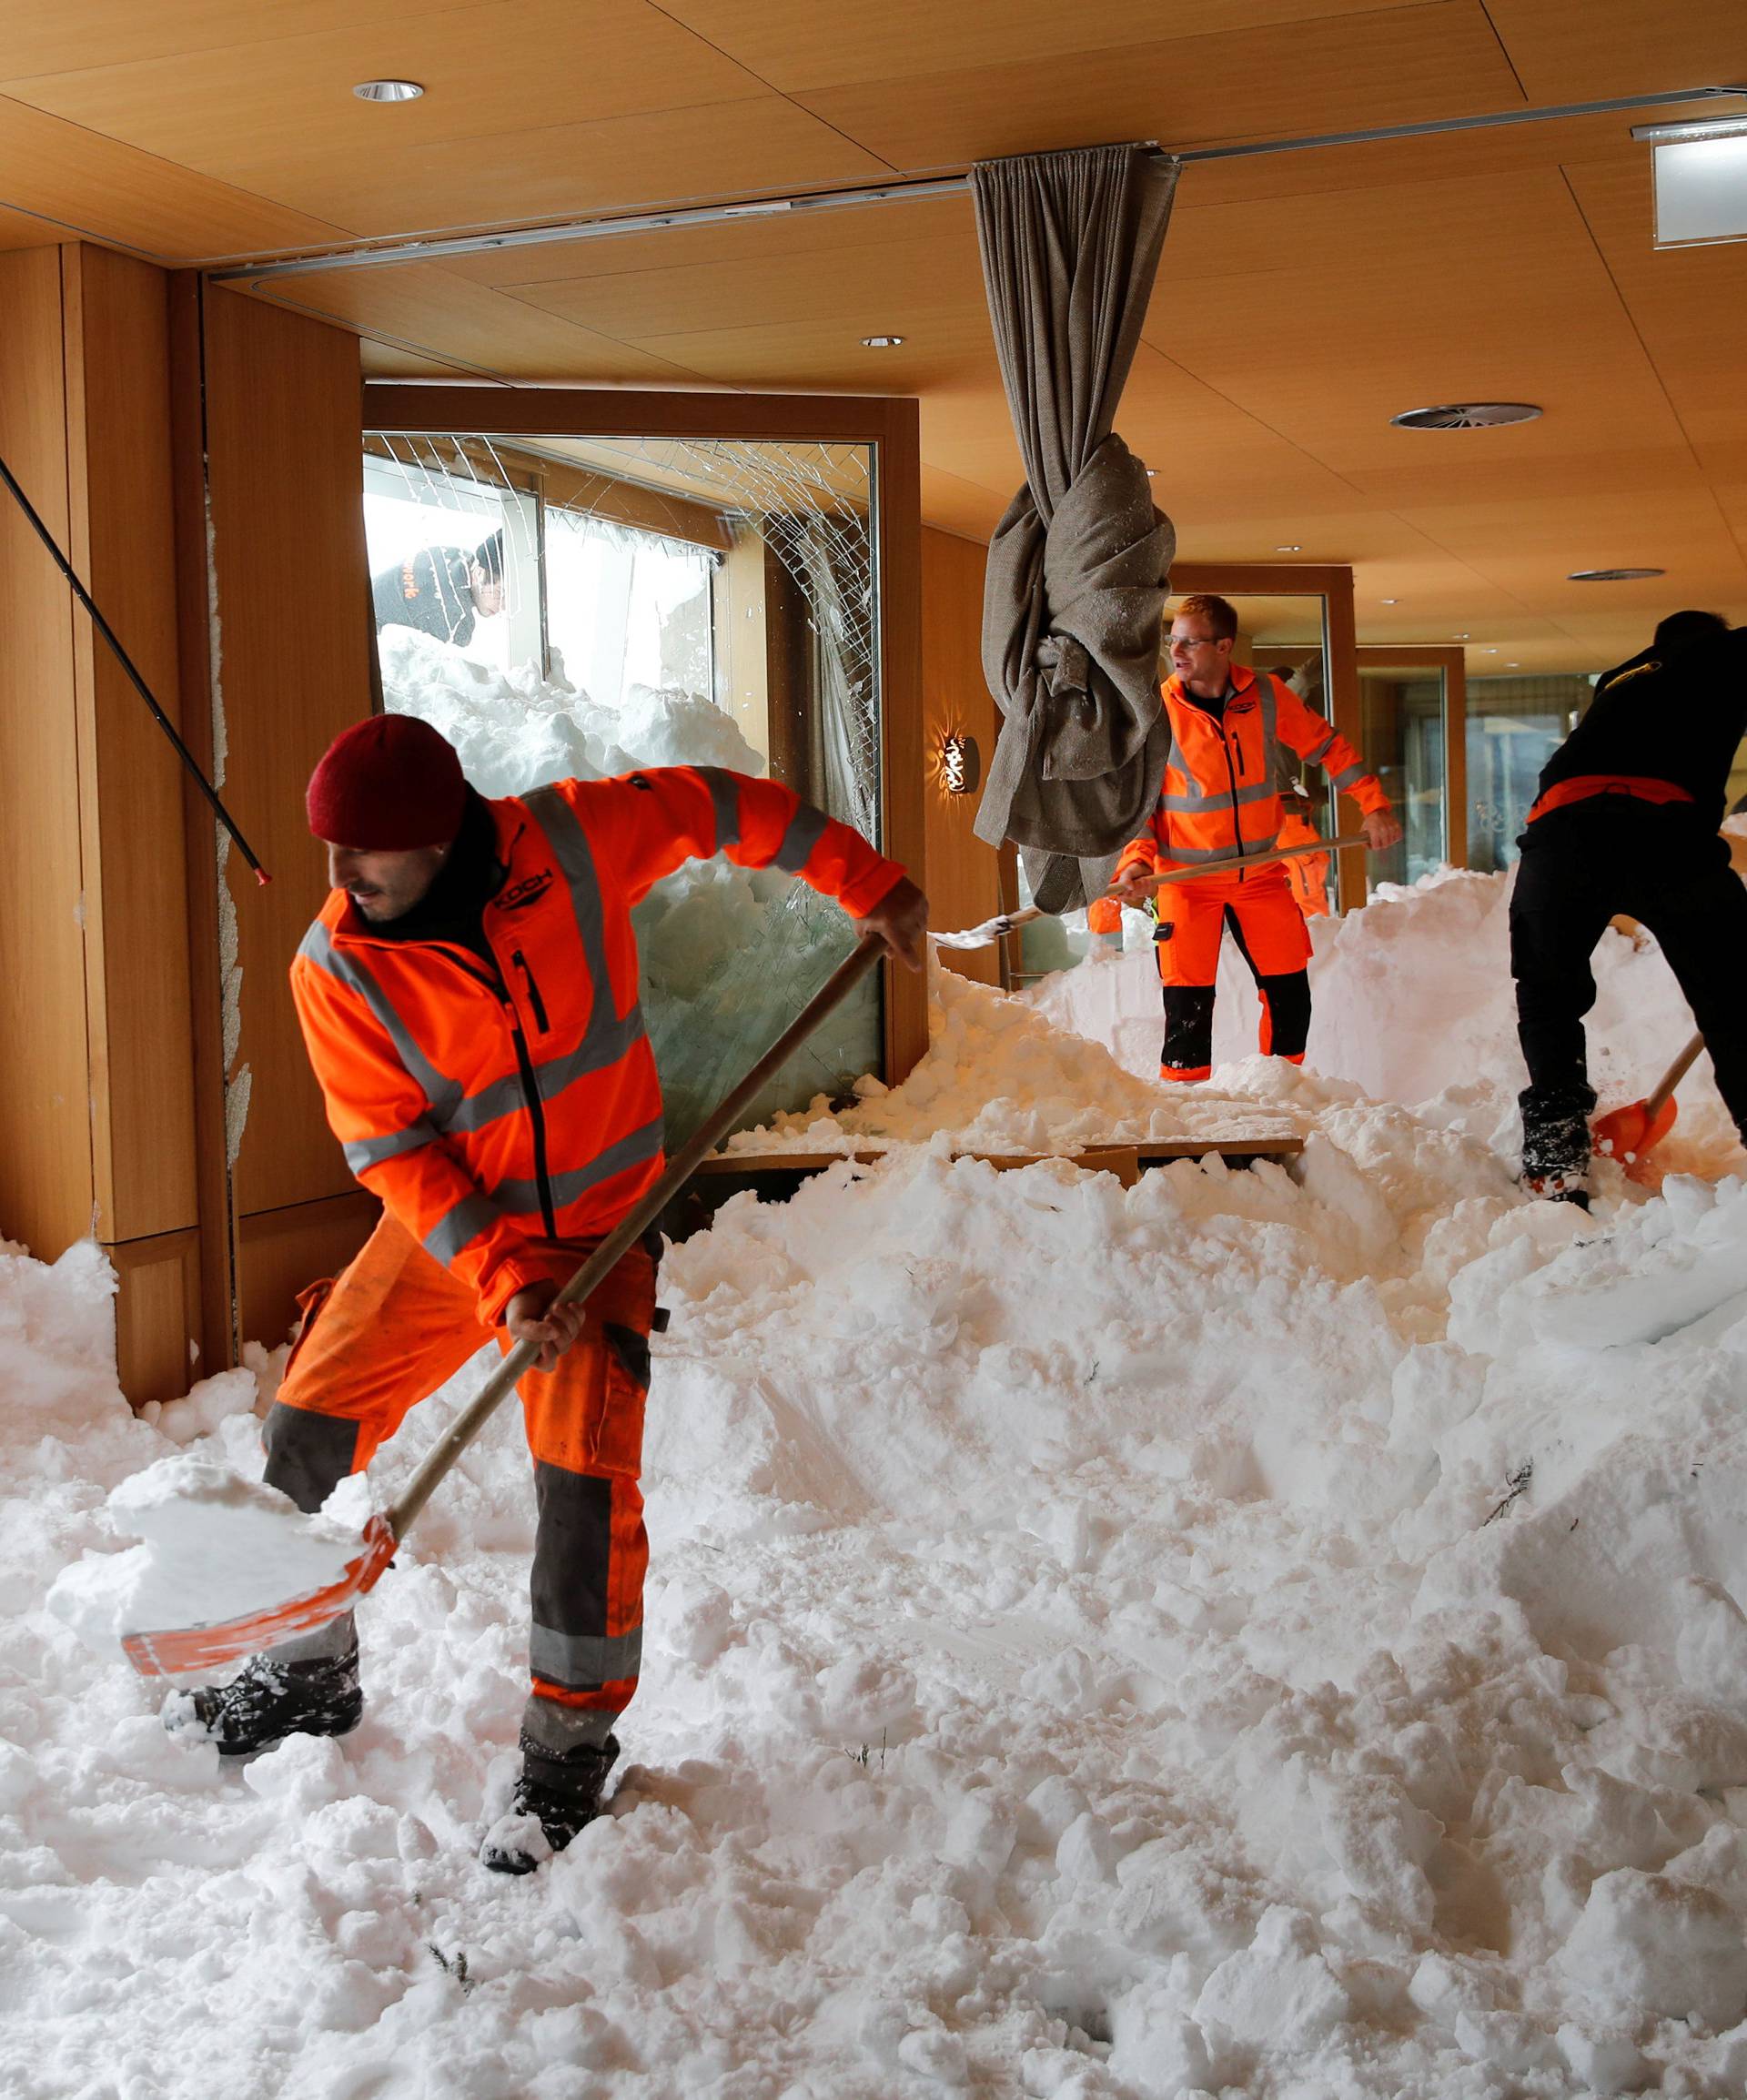 Workers shovel snow out of a restaurant after an avalanche at Santis-Schwaegalp